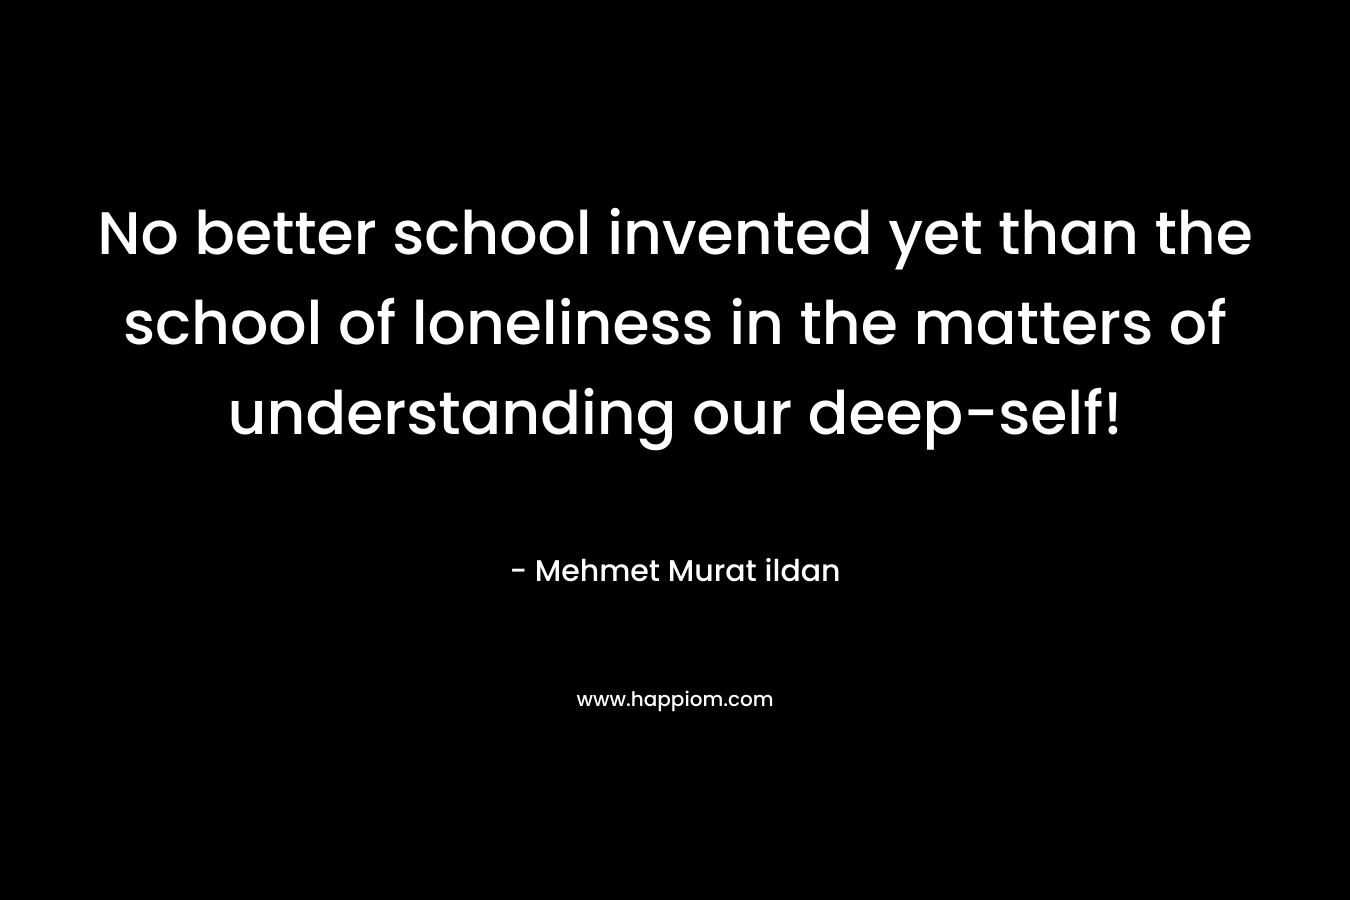 No better school invented yet than the school of loneliness in the matters of understanding our deep-self!